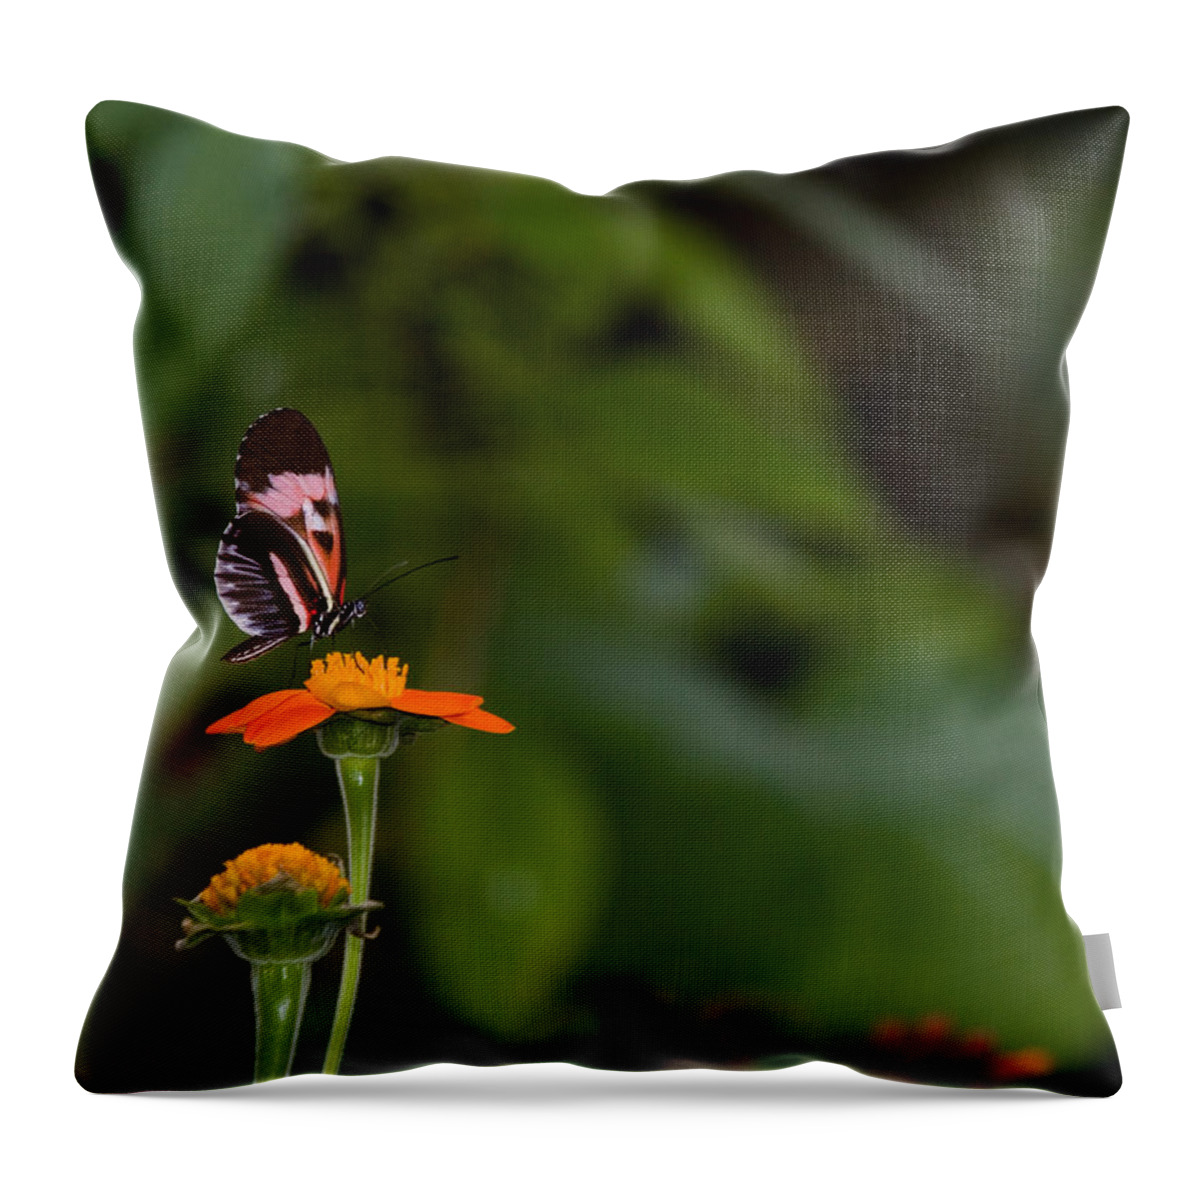 Butterfly Throw Pillow featuring the photograph Butterfly 26 by Michael Fryd